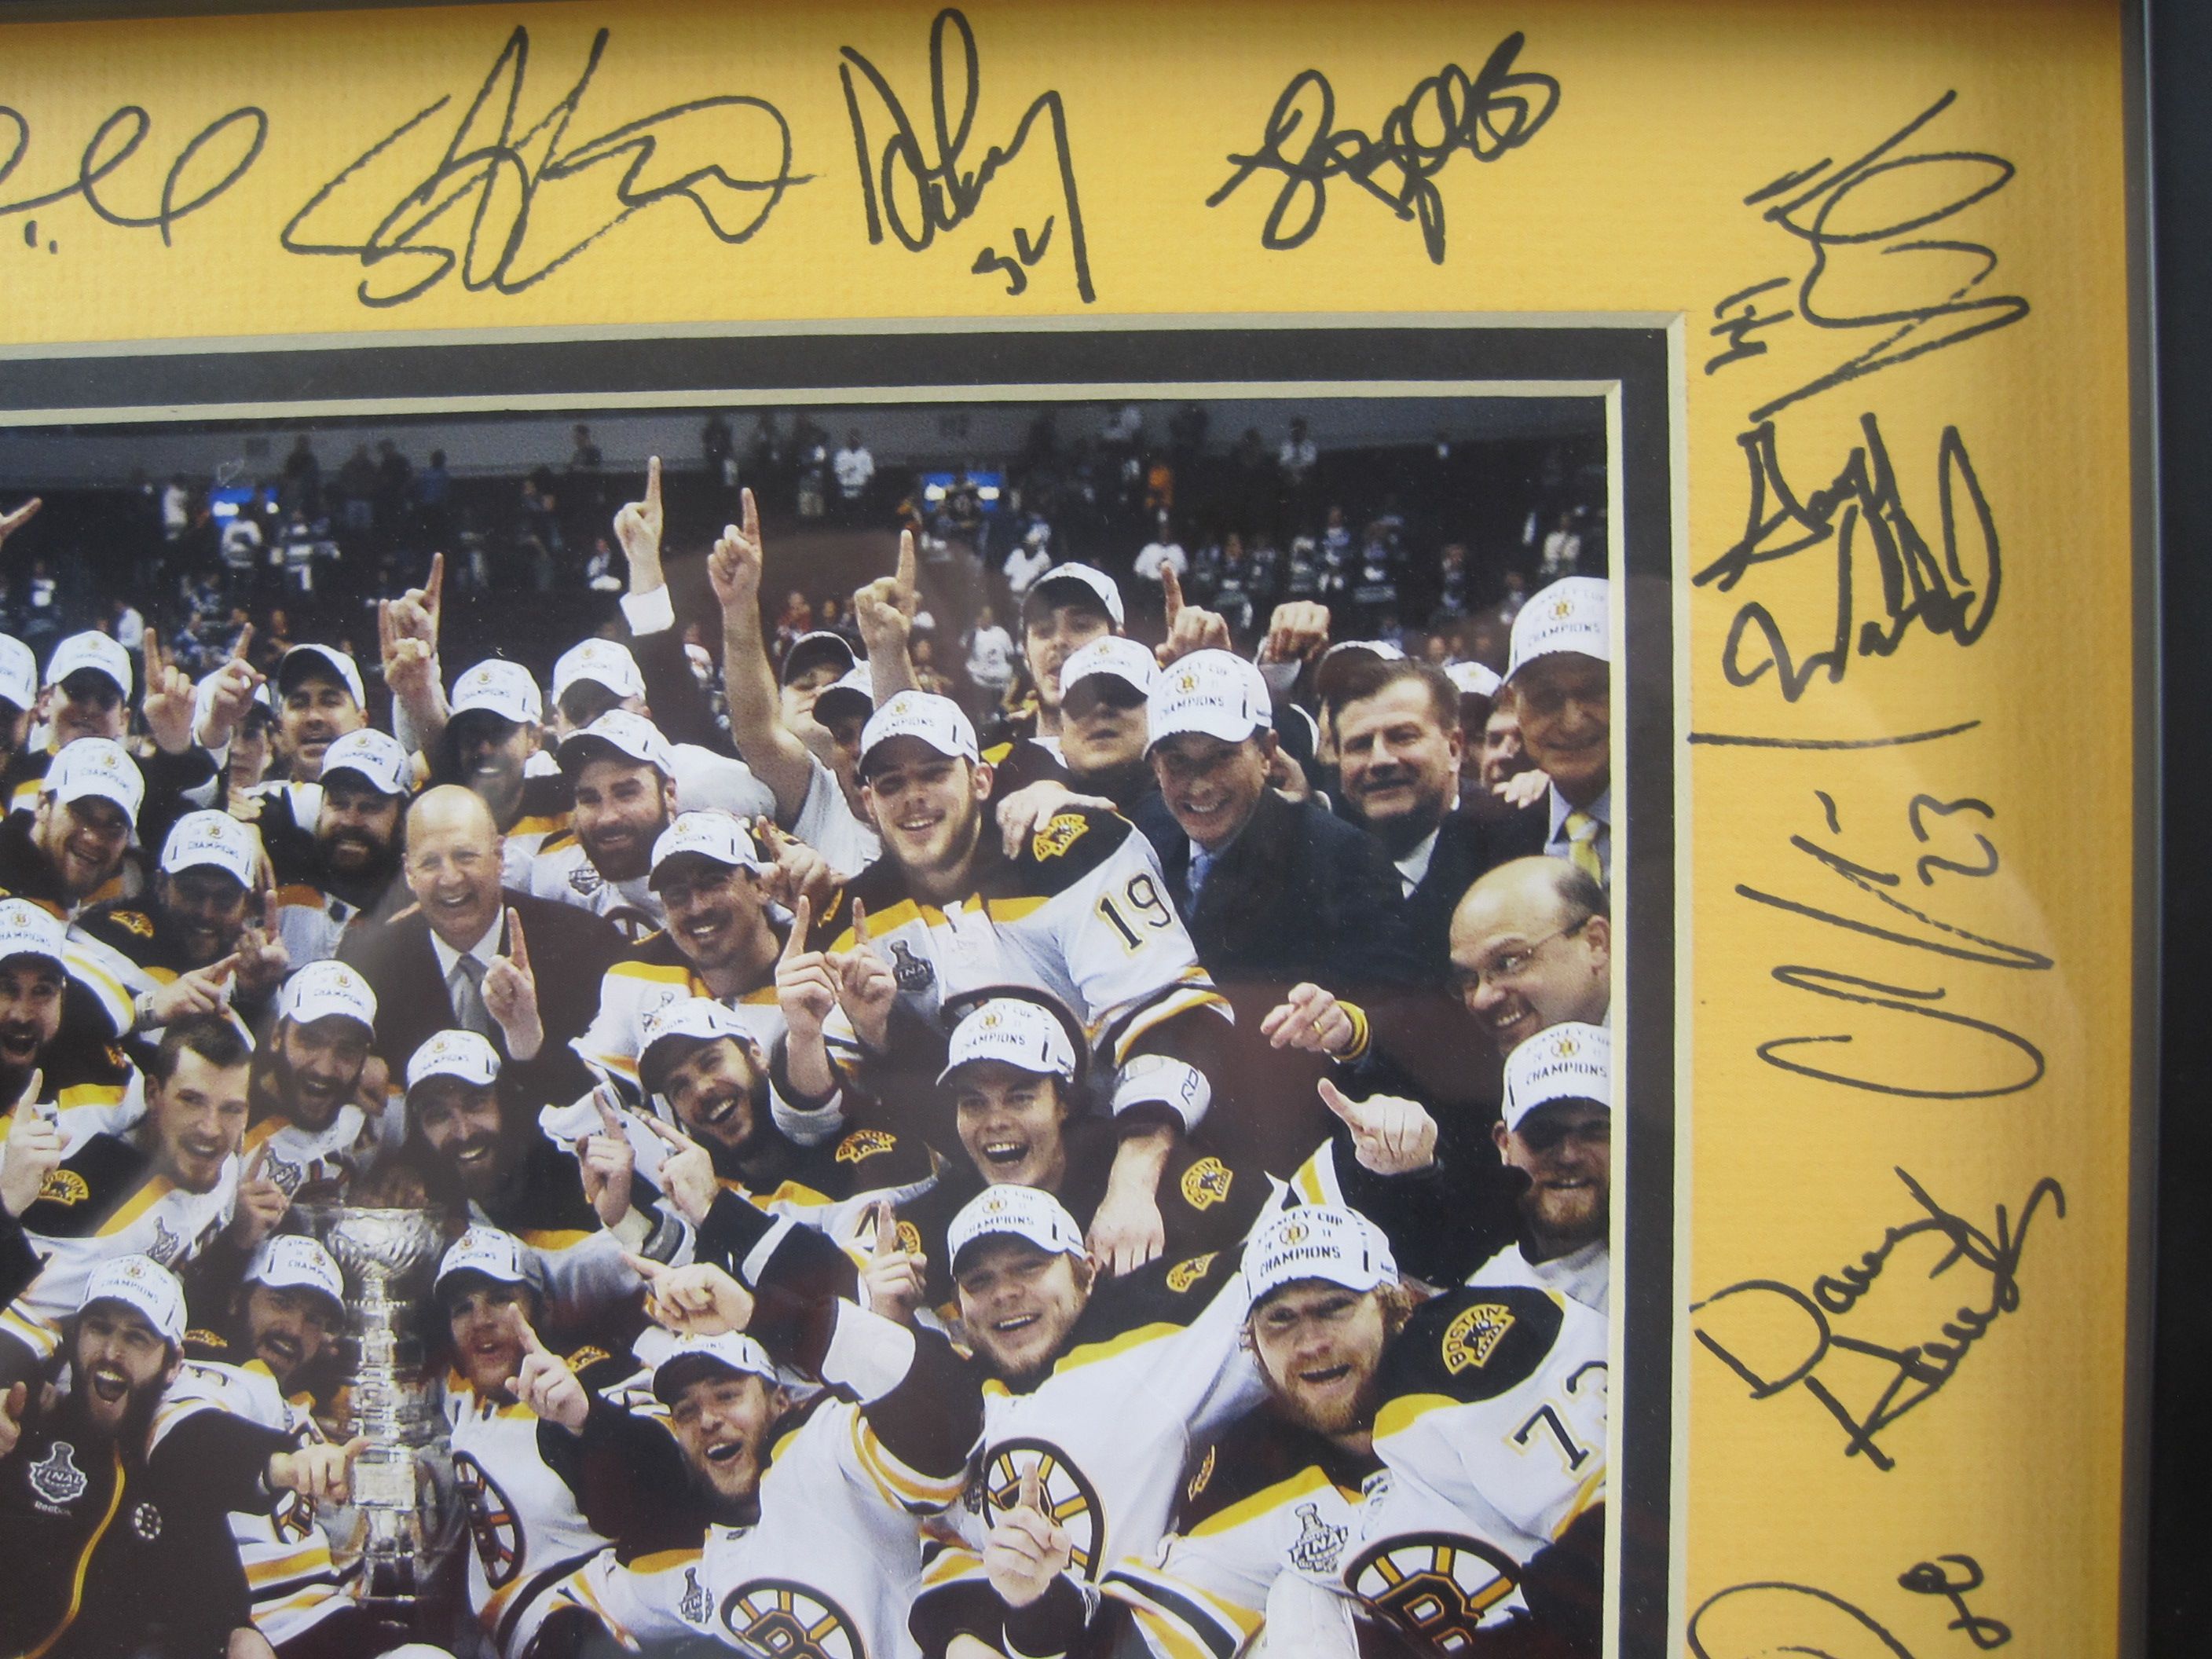 Zdeno Chara 2011 Stanley Cup Boston Bruins Autographed Hockey Photo